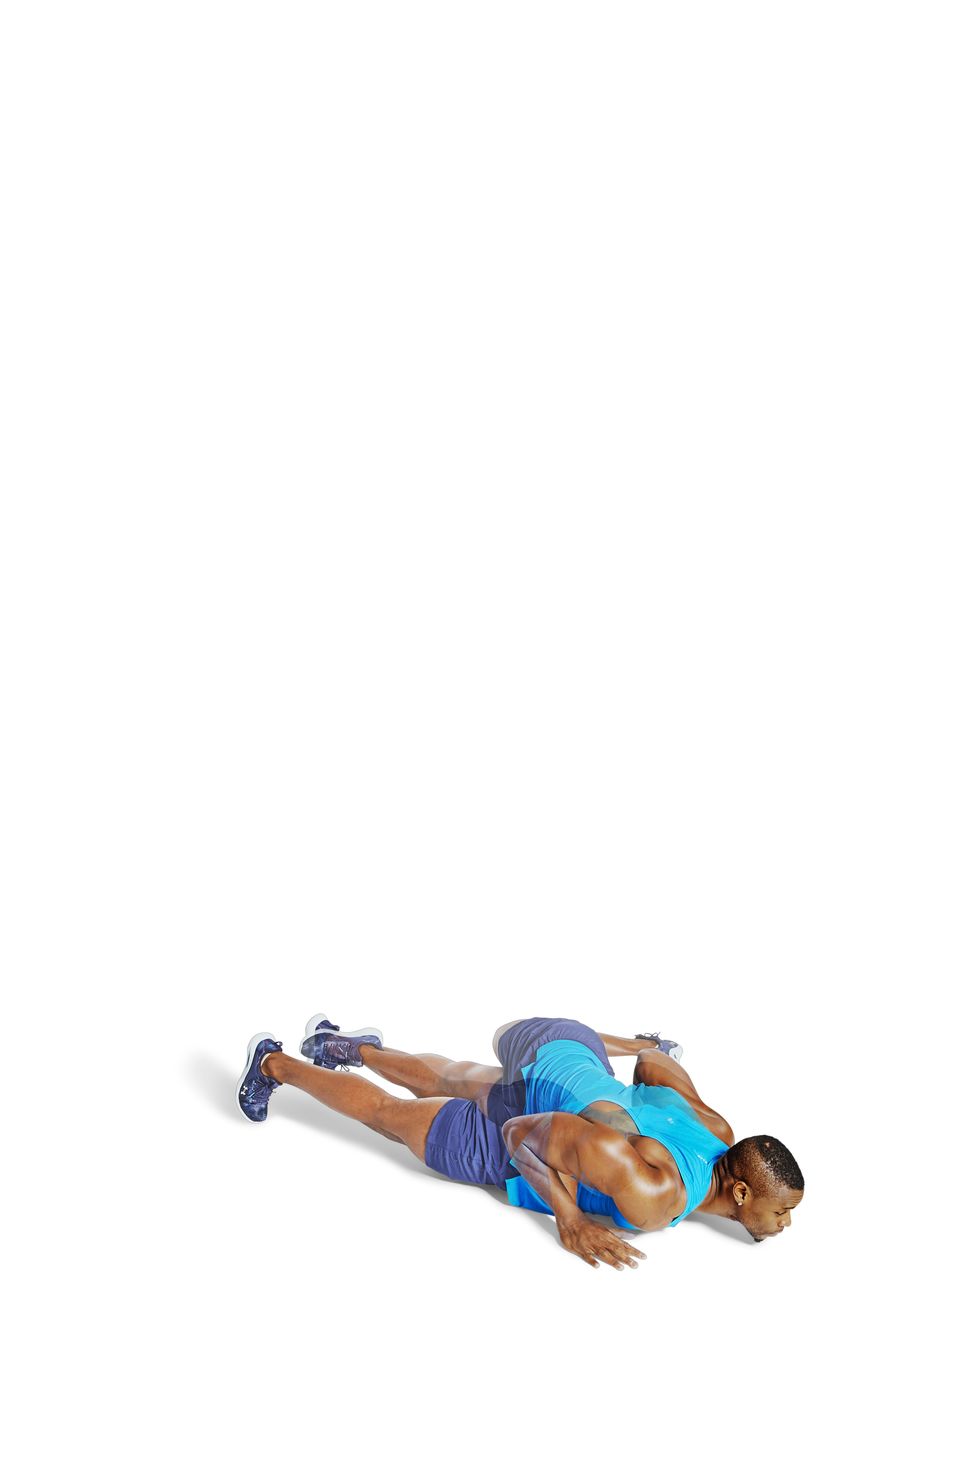 inchworm to scorpion muscle building, arms, strength, warm up exercise, workout